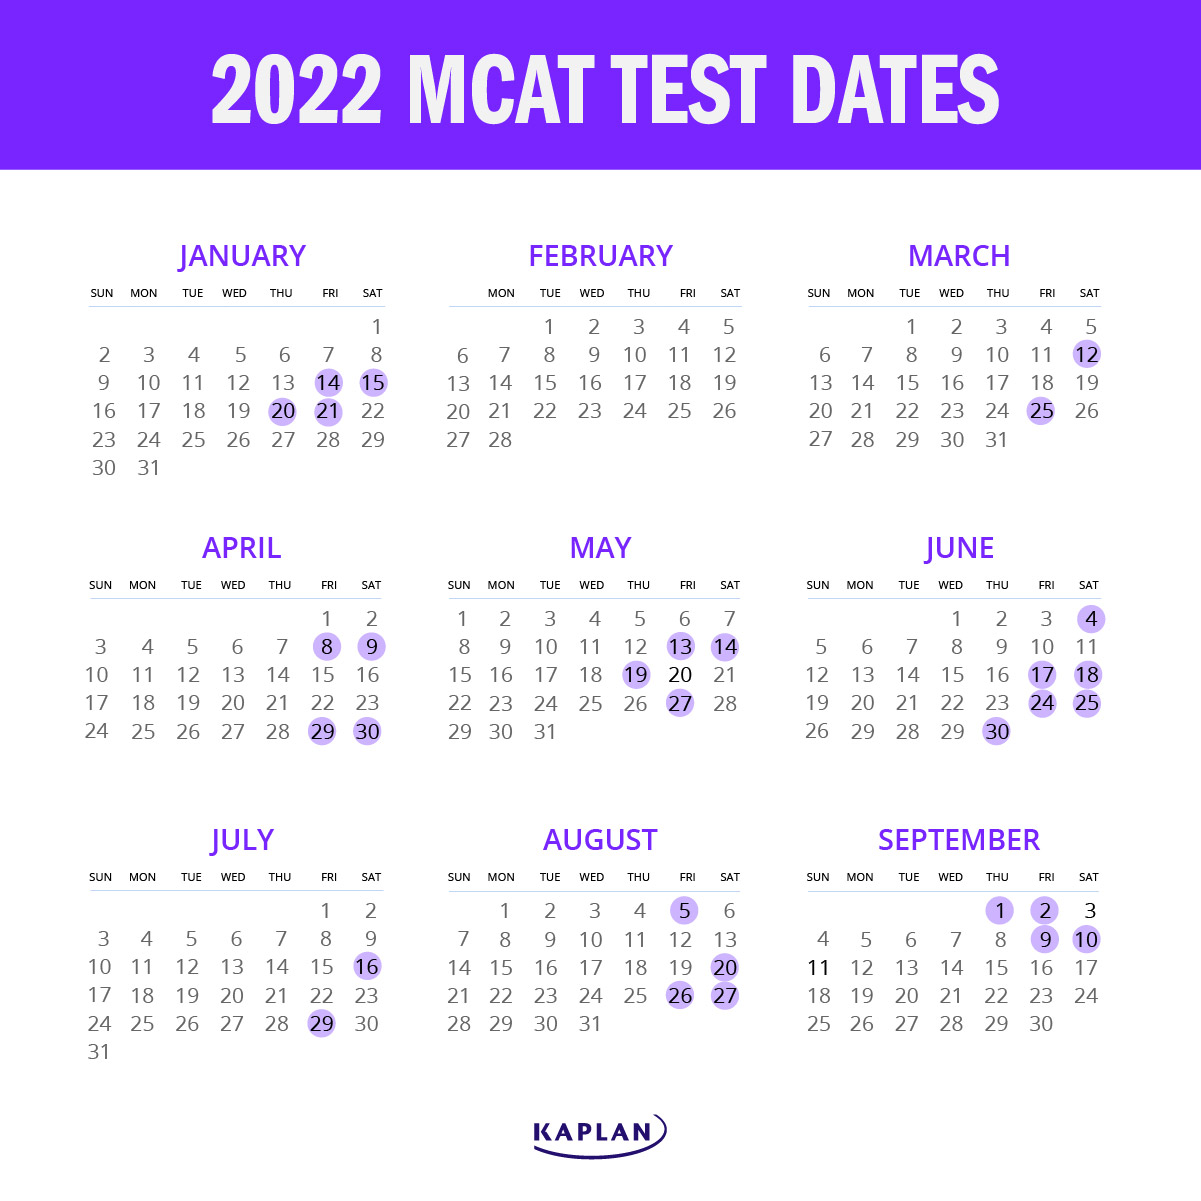 mcat-test-dates-date-testing-exam-when-to-take-2022-january-march-april-may-june-july-august-september